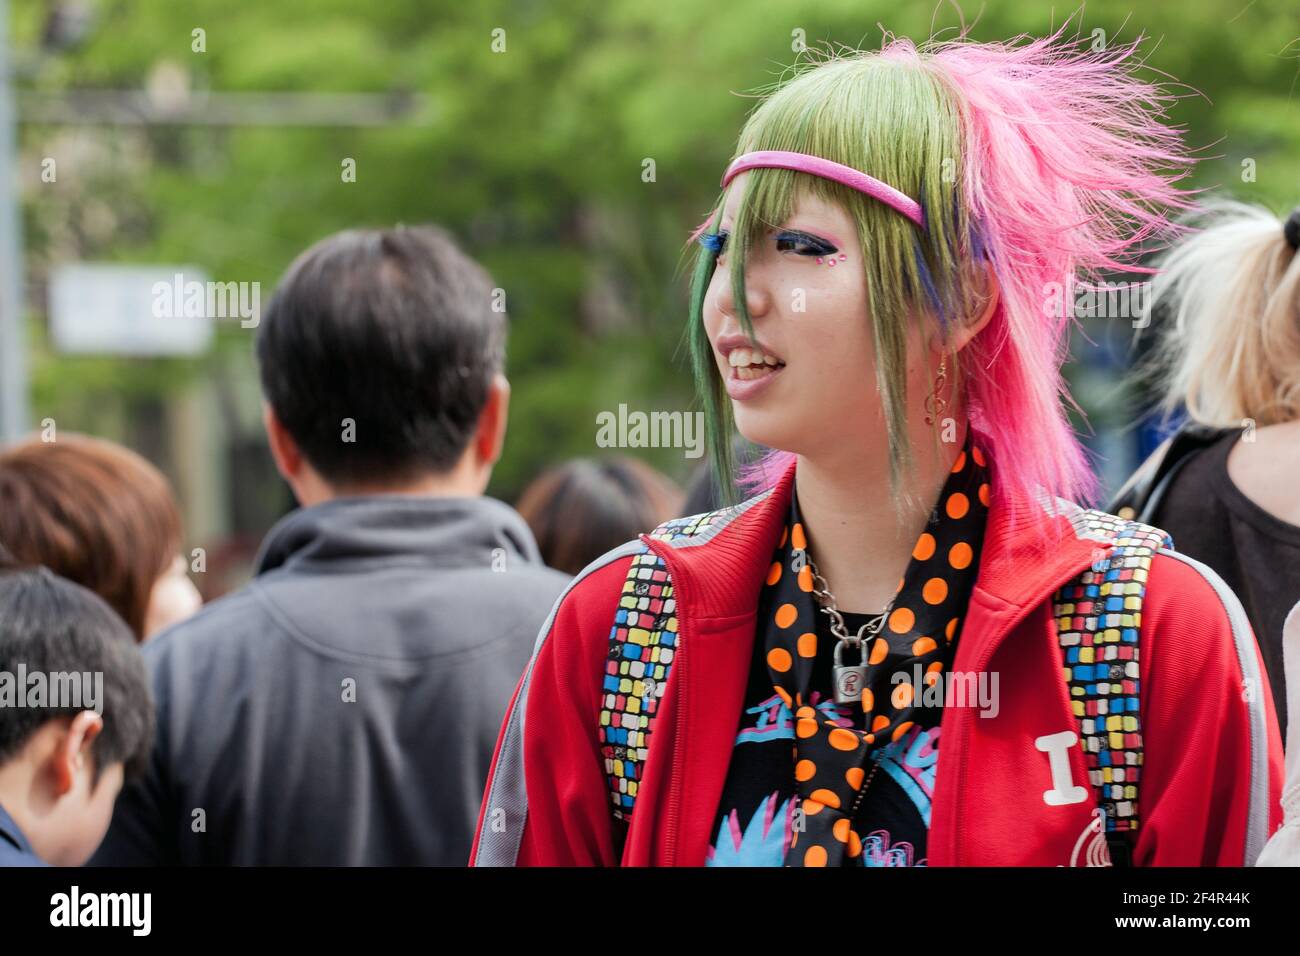 Street Fashion 2008: Japanese female with multicoloured dyed hair and colourful clothes, Harajuku, Tokyo, Japan Stock Photo